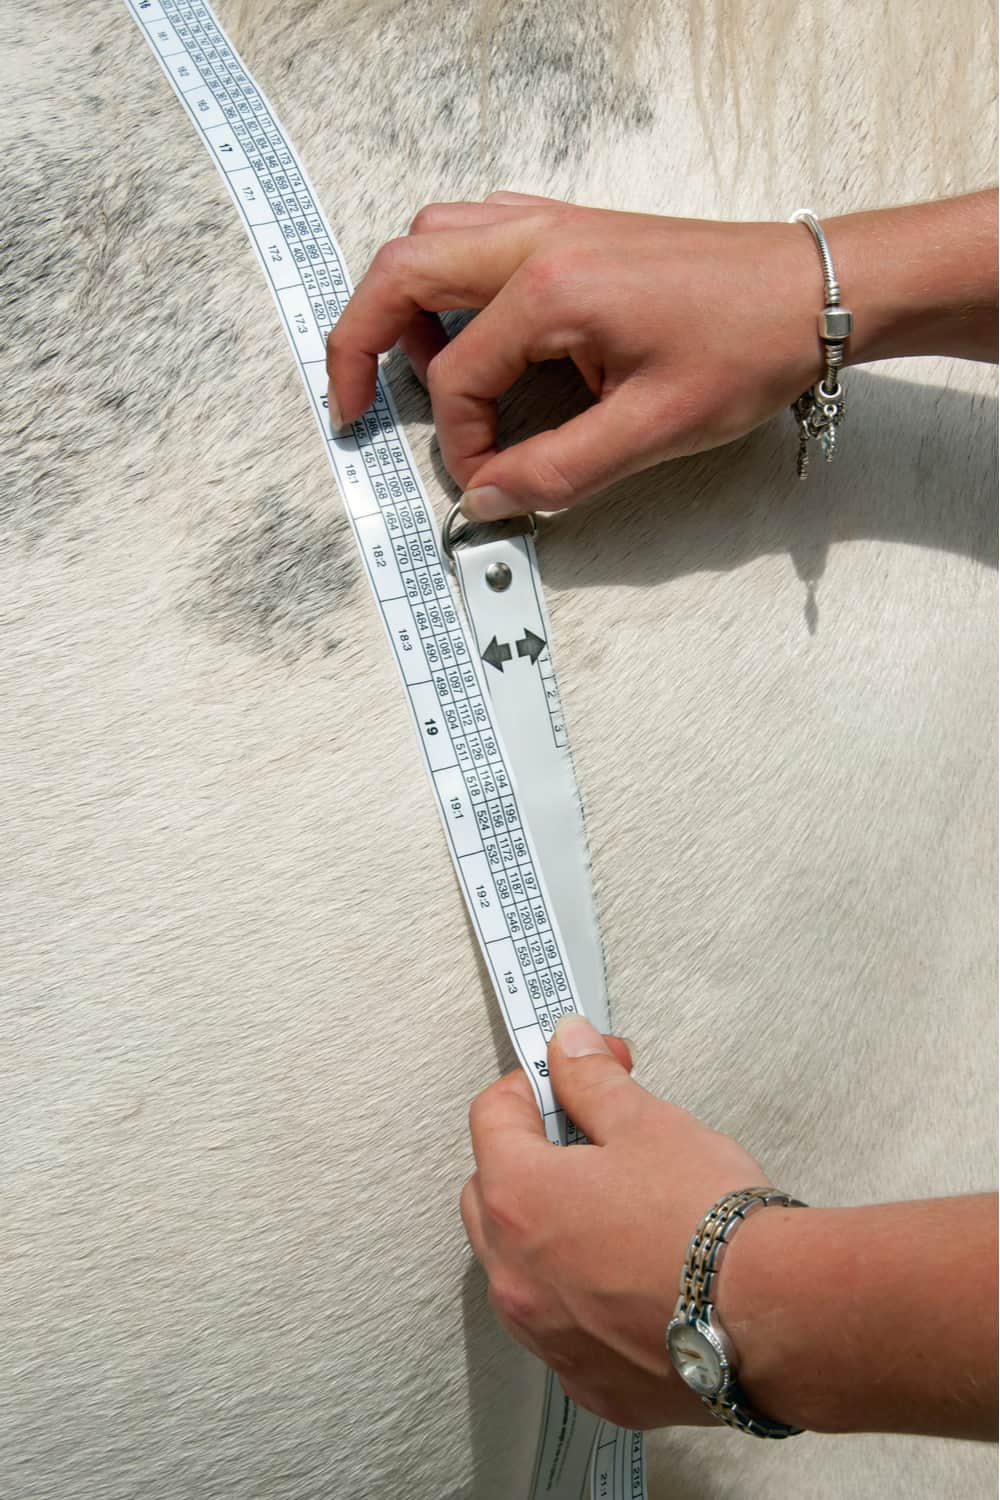 Measuring Horse Weight